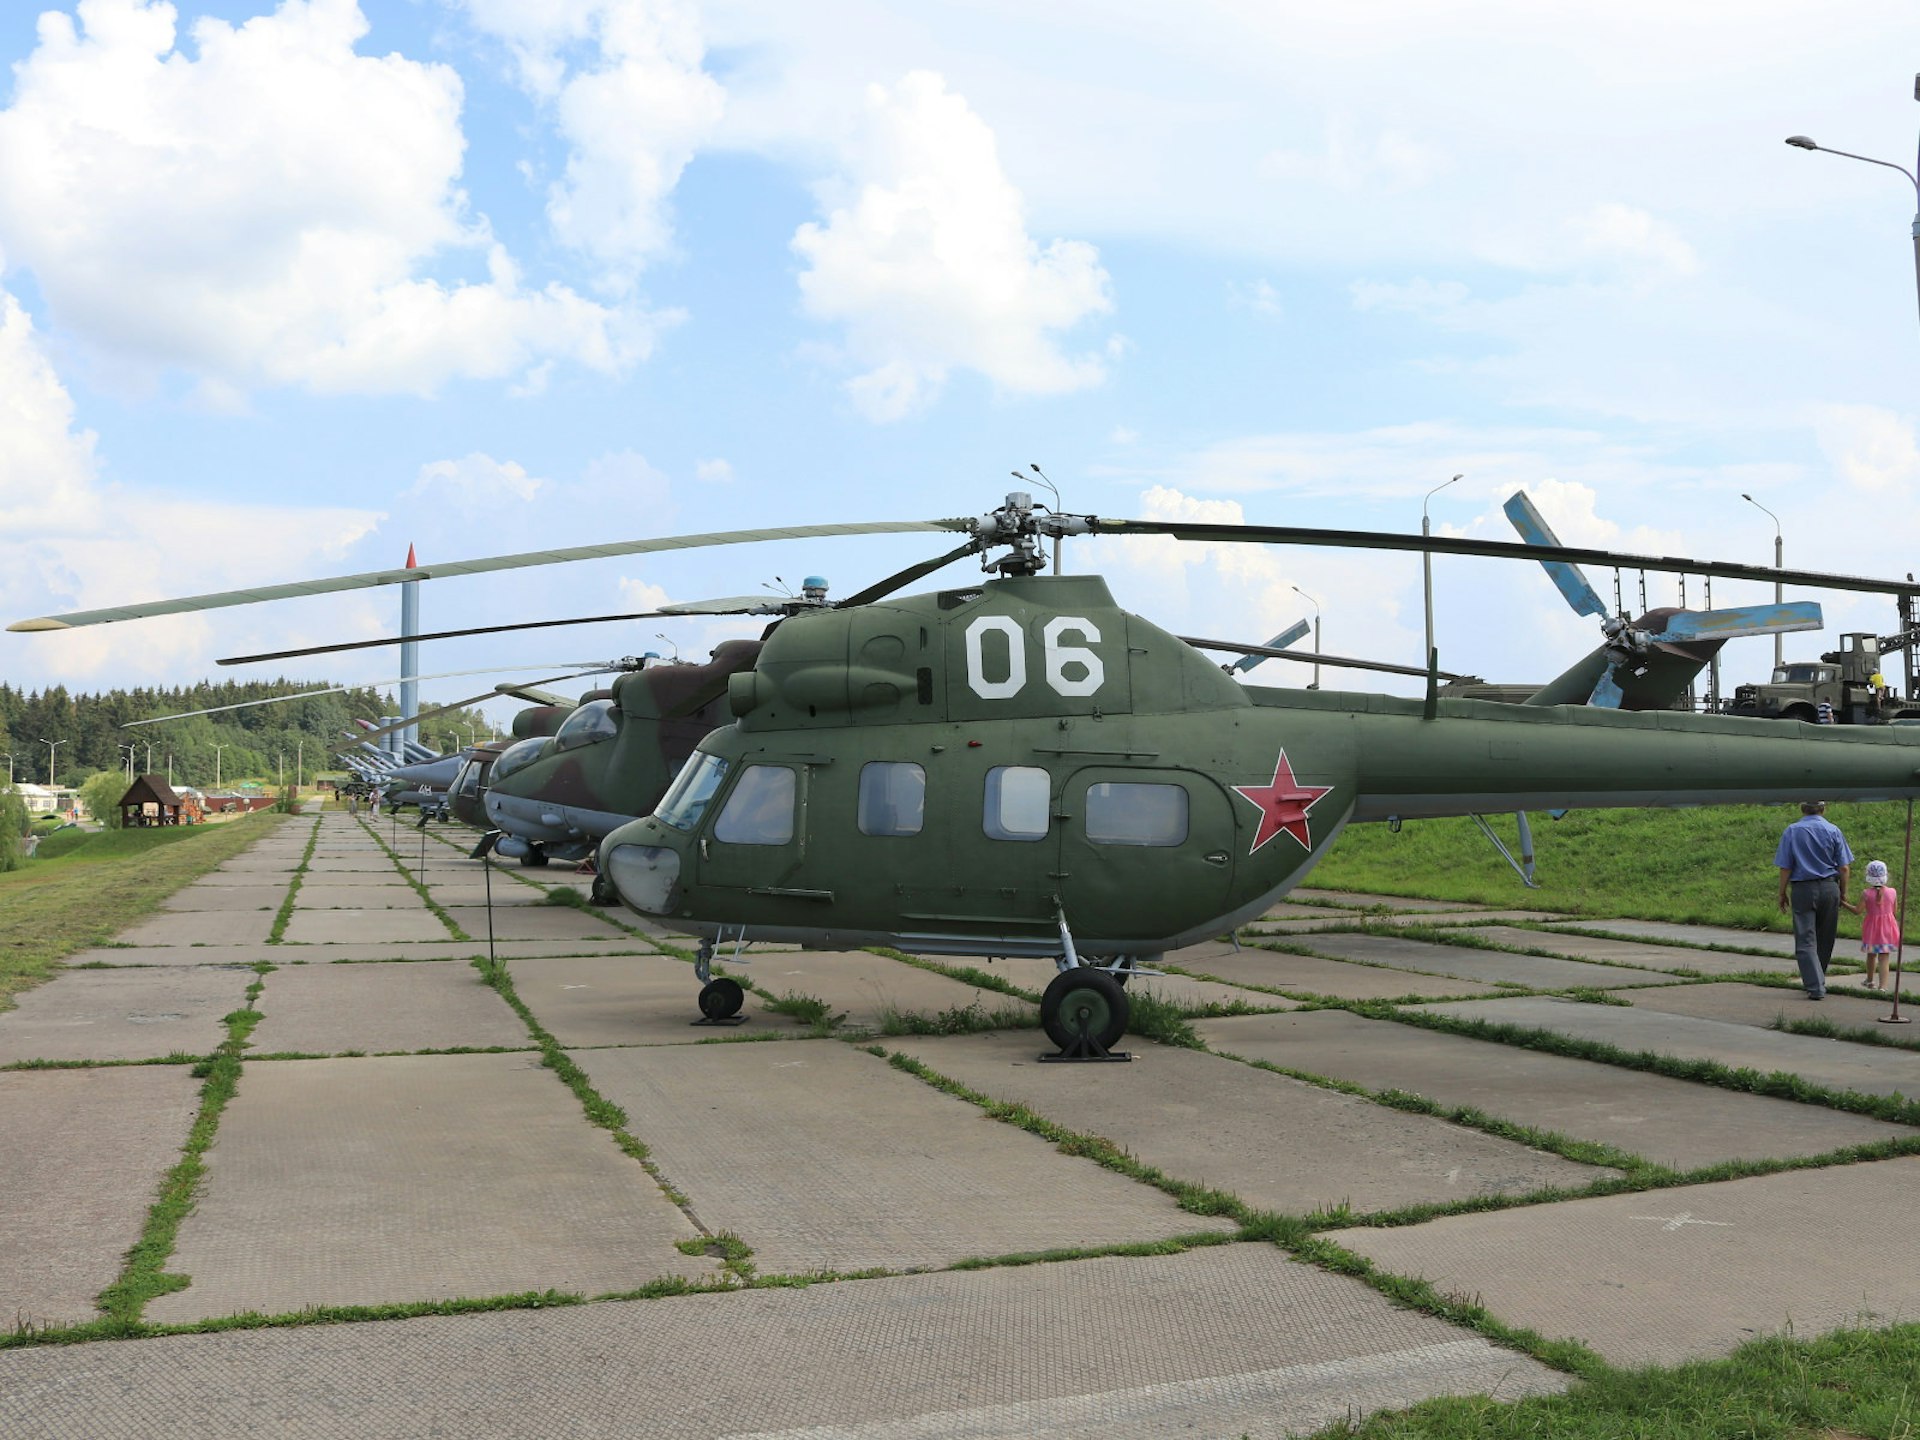 Helicopters lined up at the Stalin Line Museum © Greg Bloom / Lonely Planet